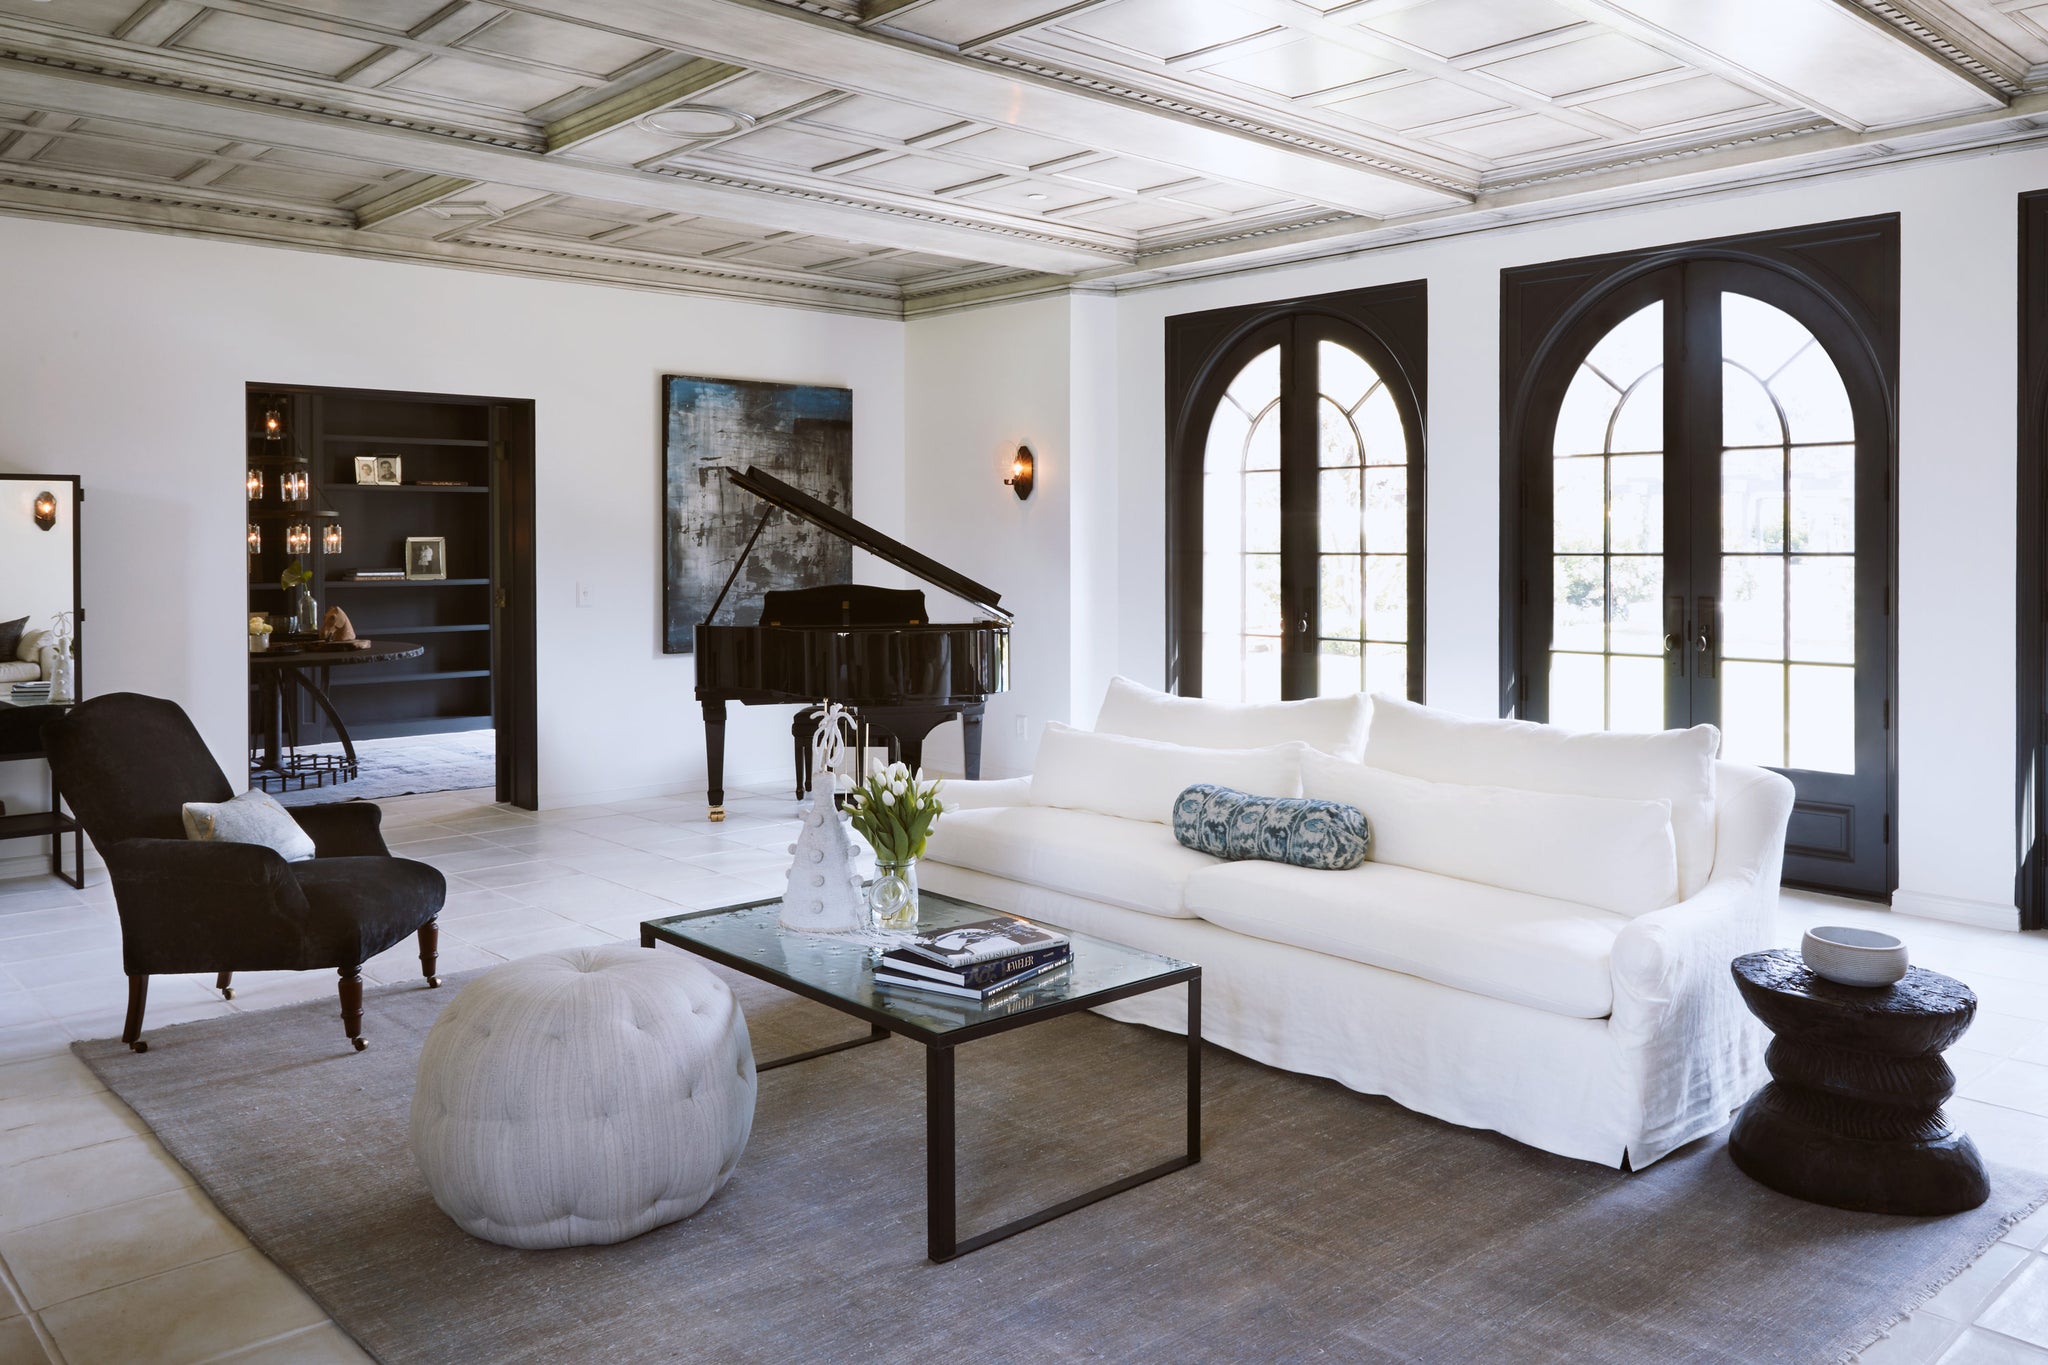  Large living room with daylight with a slipcovered sofa in Brevard Ivory. There is a blackpiano in the back corner, a black armchair on the left side of the room. The coffee table is metal and mirror top, there is a grey ottoman in front. Photographed in Brevard Ivory. 